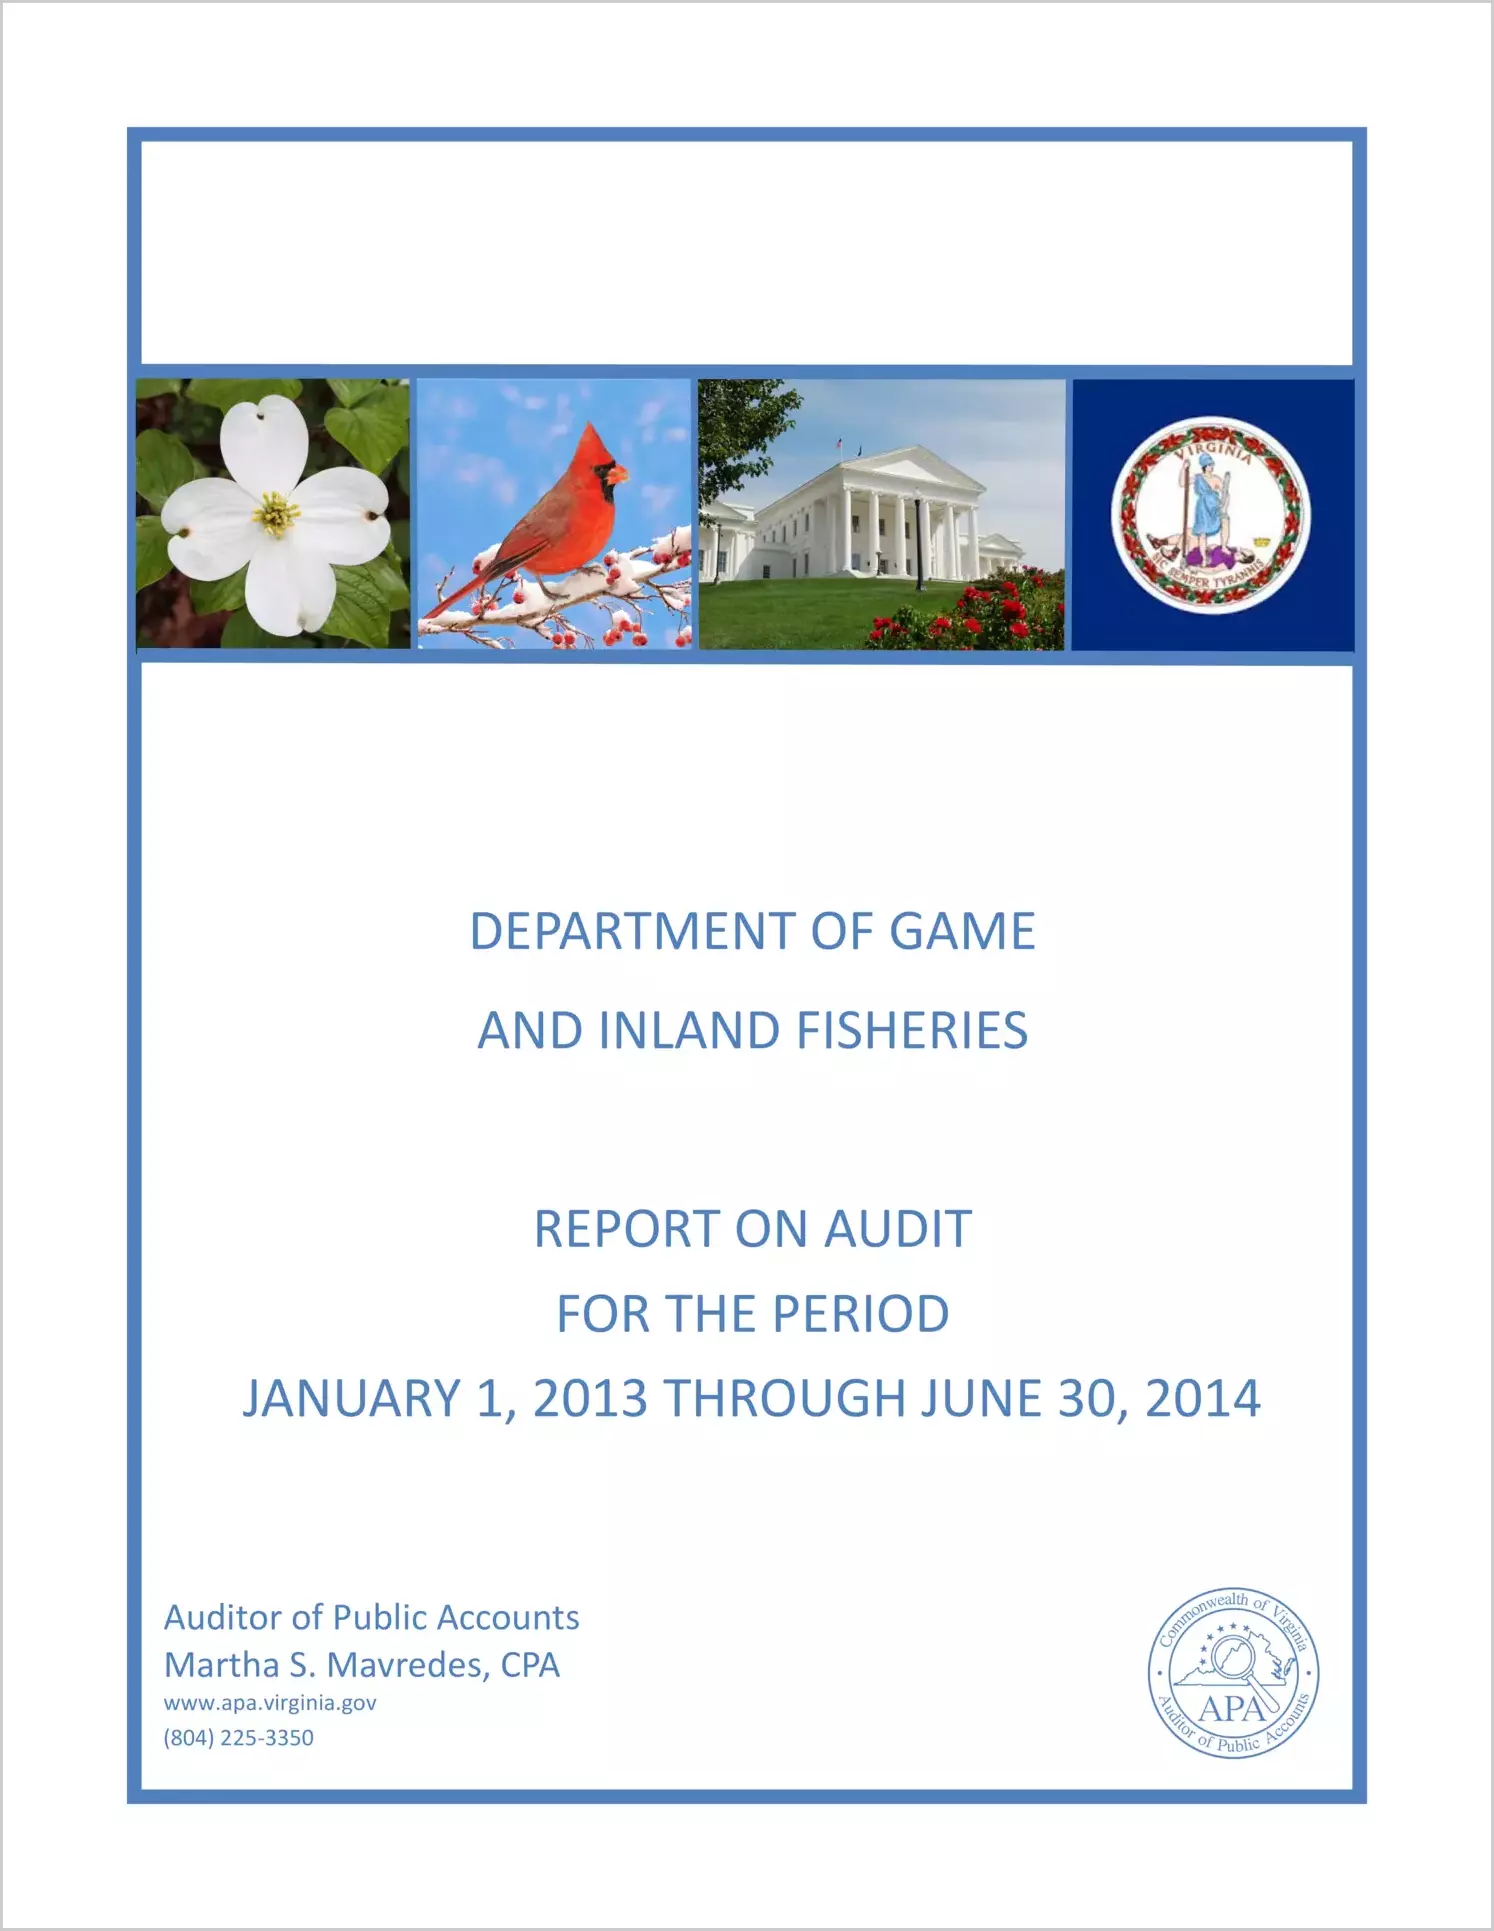 Department of Game and Inland Fisheries Report on Audit for the period ended January 1, 2013 through June 30, 2014